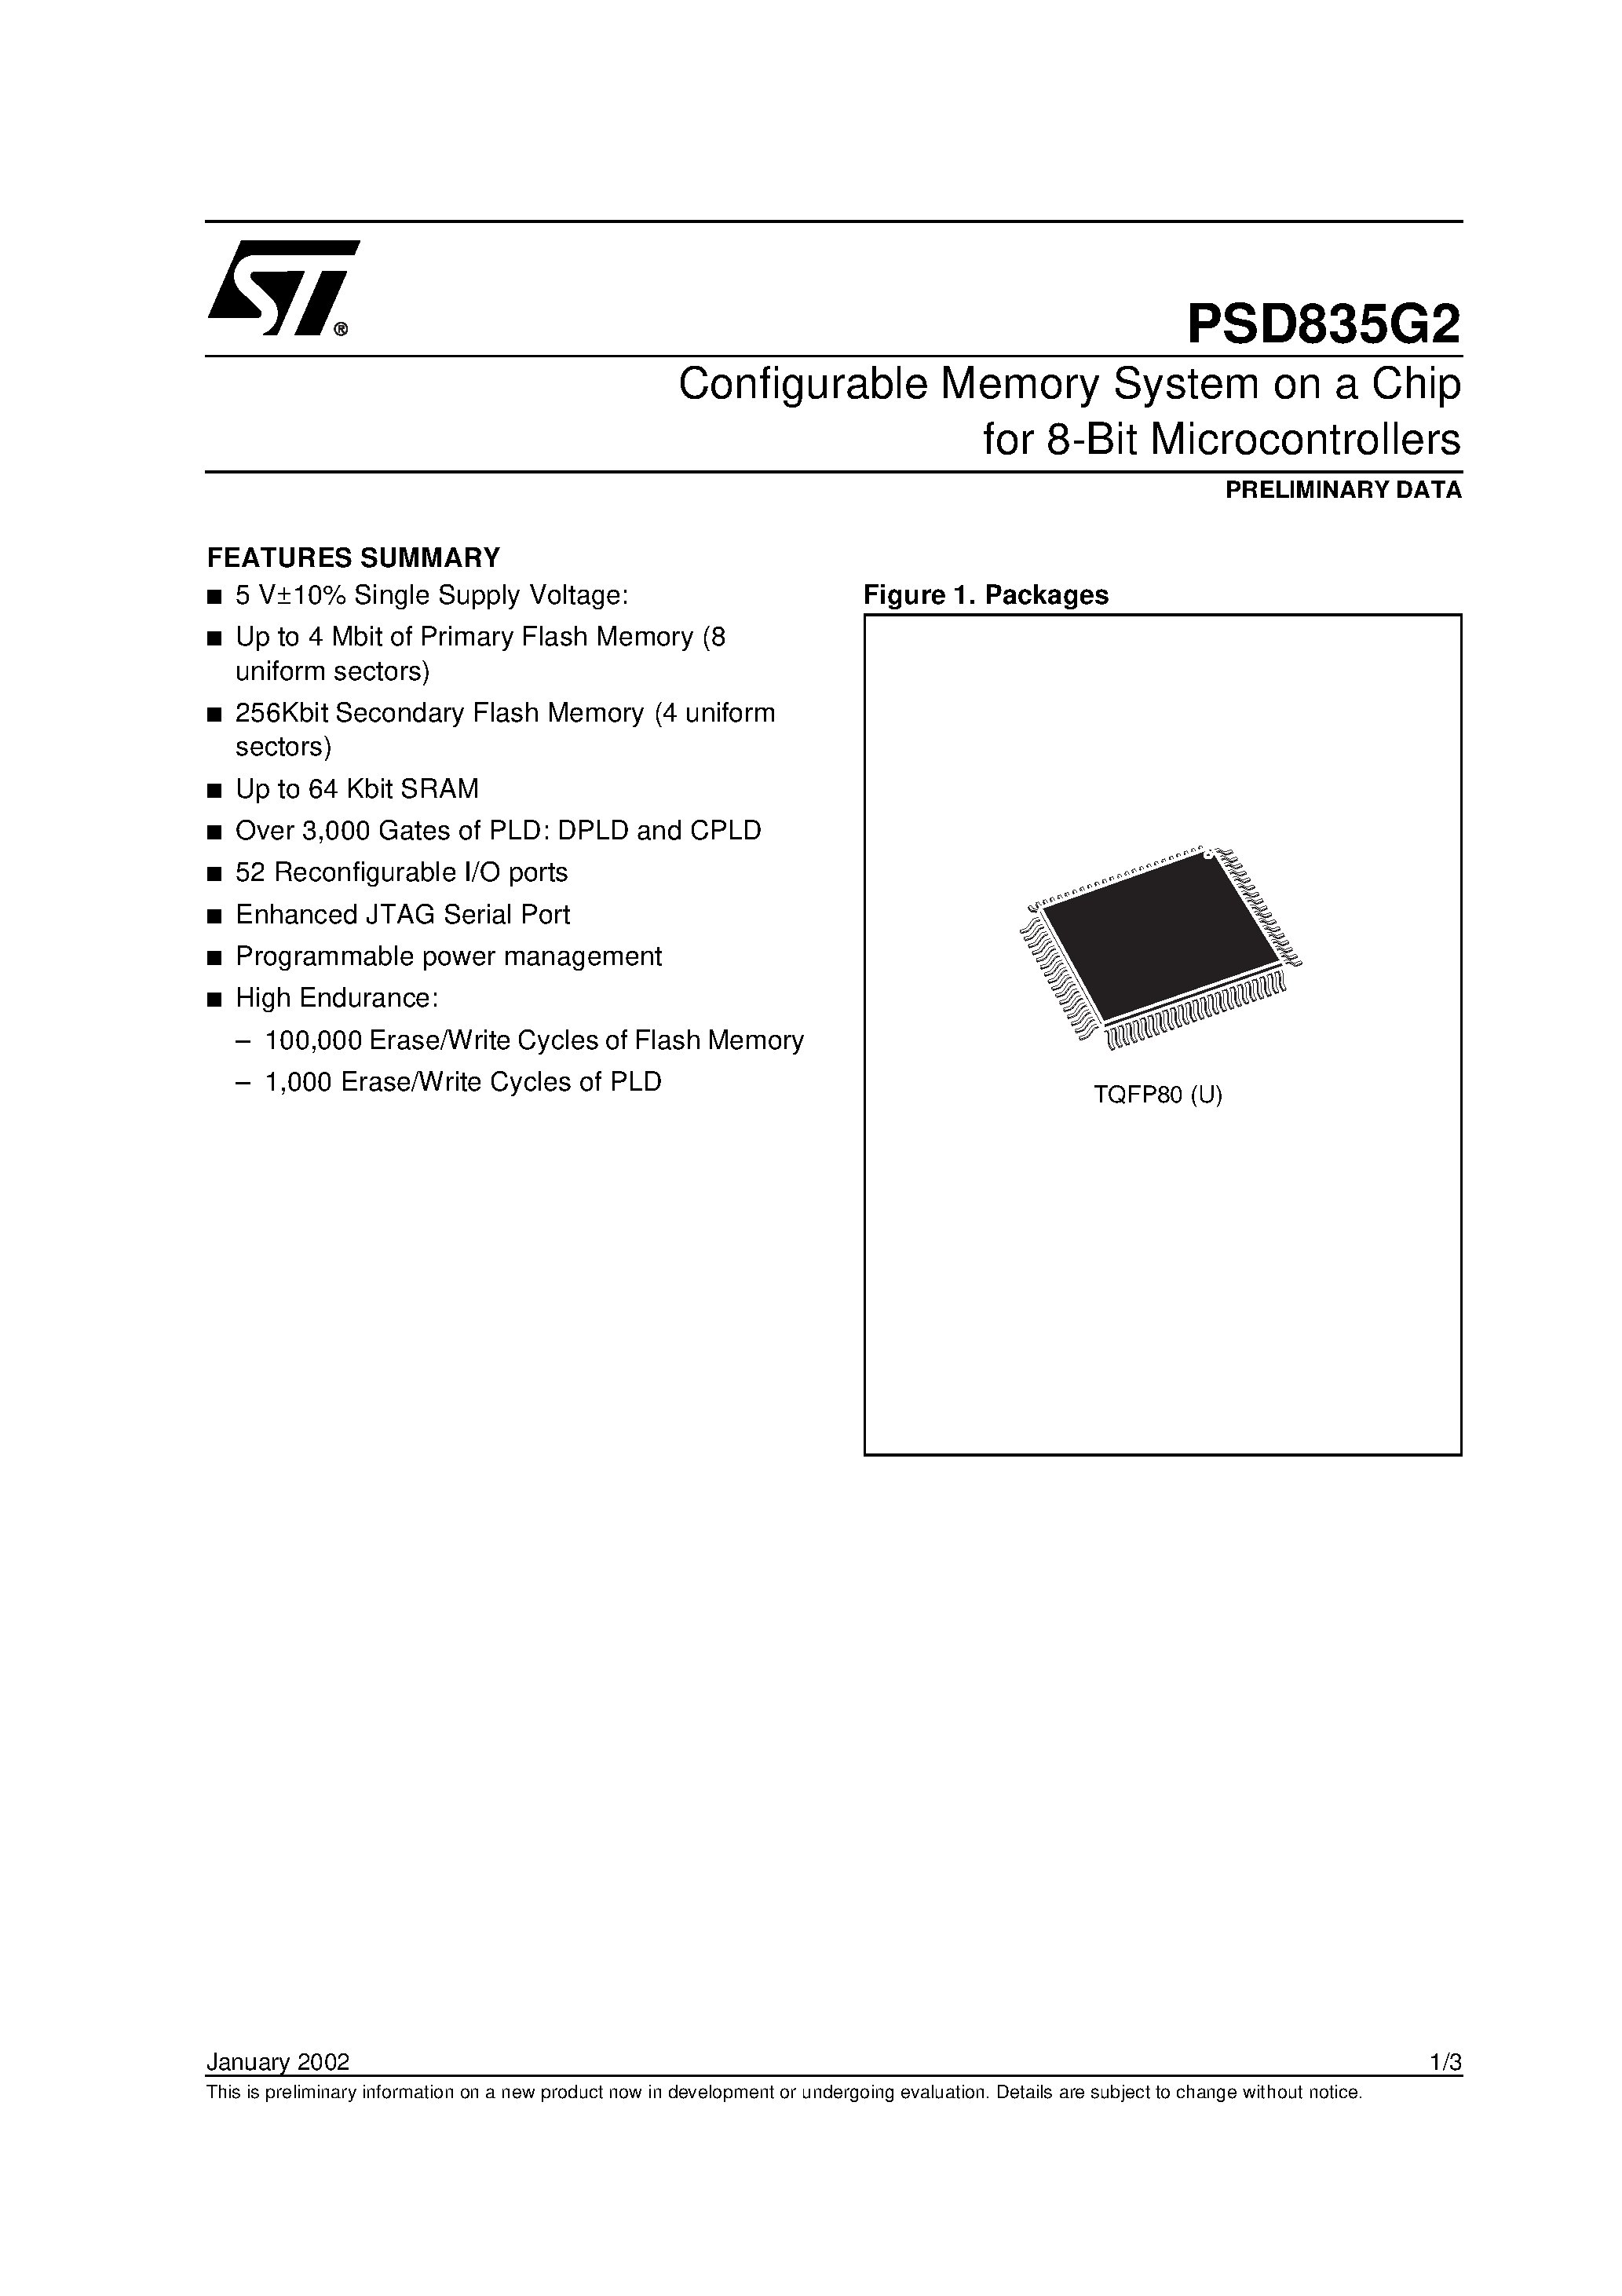 Datasheet PSD835F2-A-20JI - Configurable Memory System on a Chip for 8-Bit Microcontrollers page 1